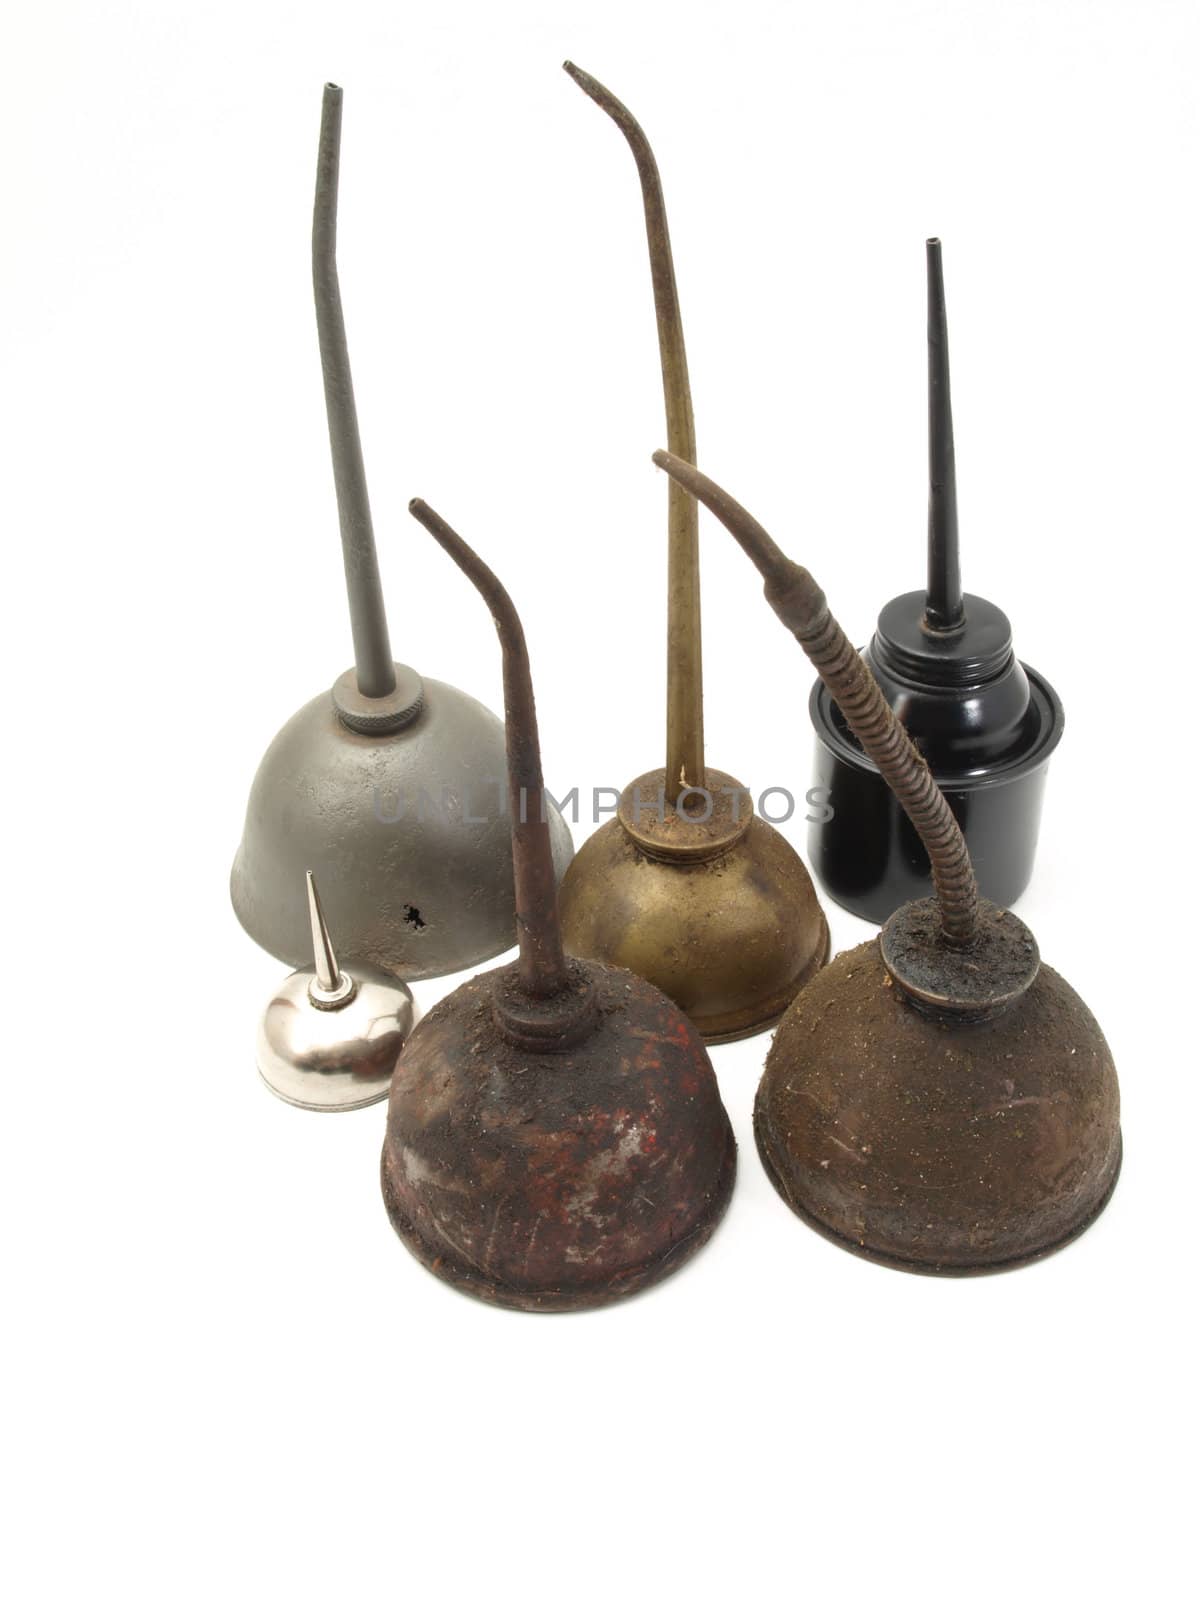 A group of oil cans, obsolete and modern, studio isolated over a white background.